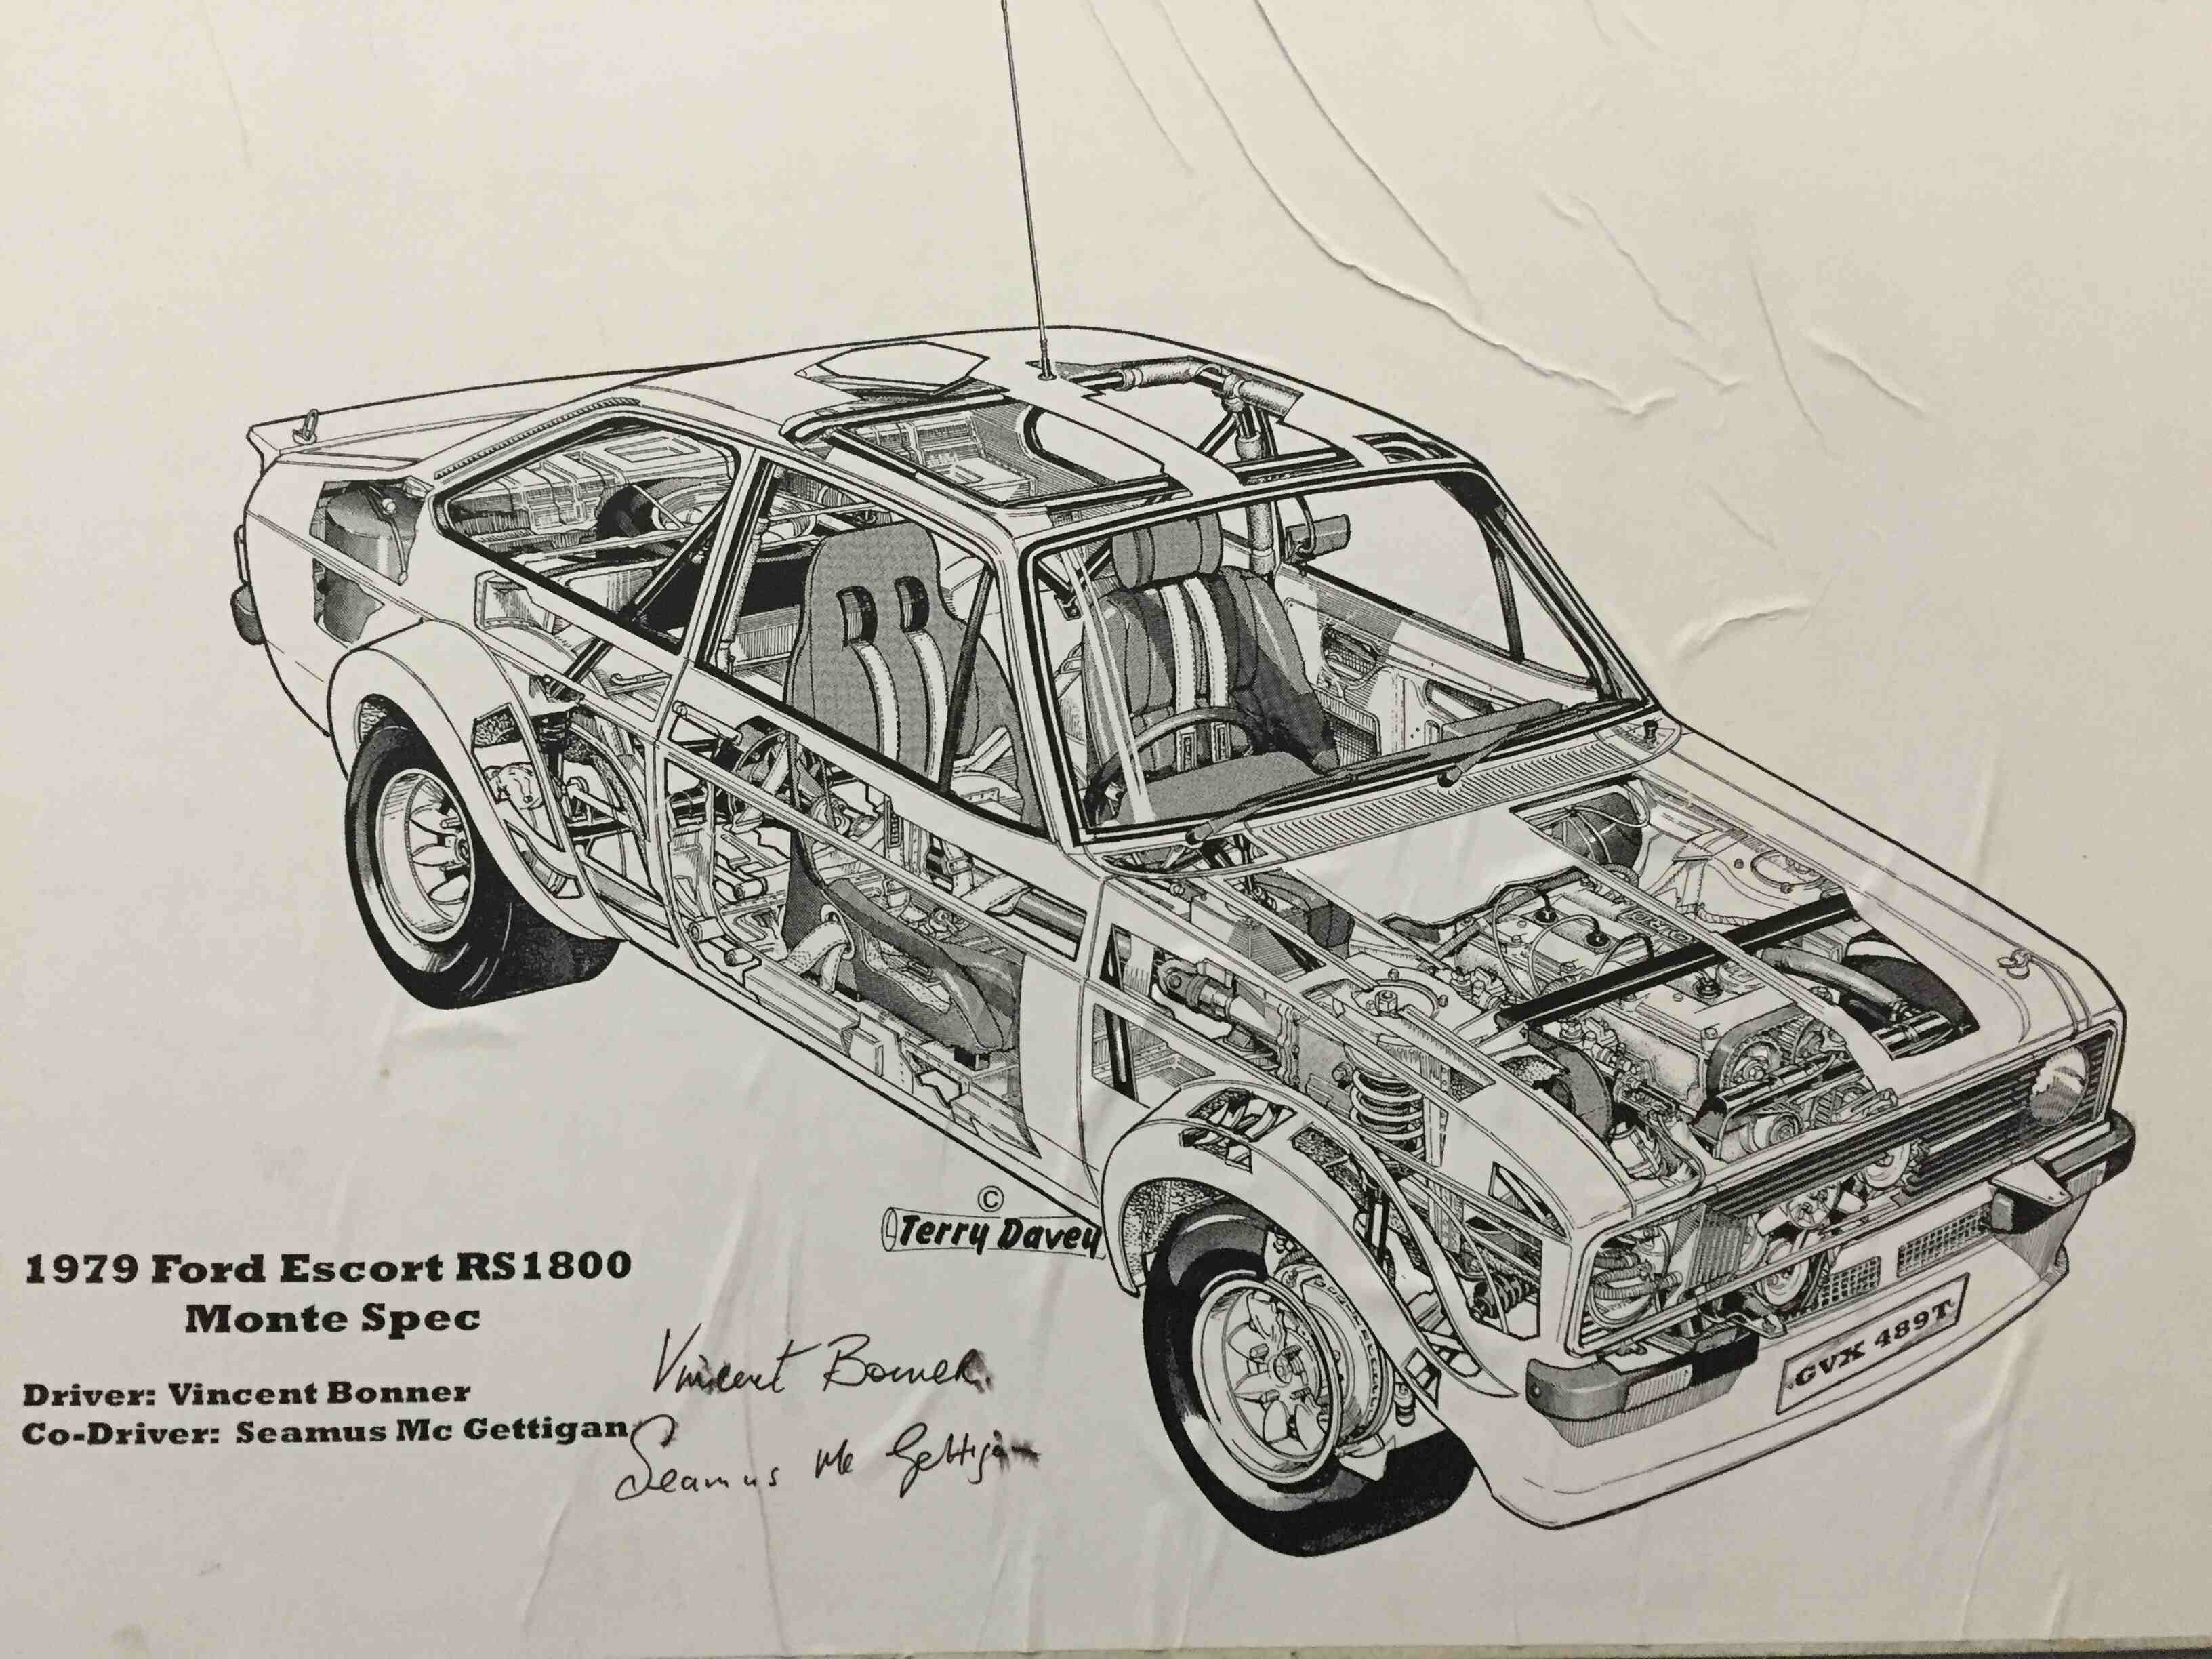 A cut away drawing of the original Ford works RS1800 Escort , with a bit of luck and support, double winner of the Donegal Rally, James Cullen will behind the wheel of an Escort for this year's Donegal Rally.